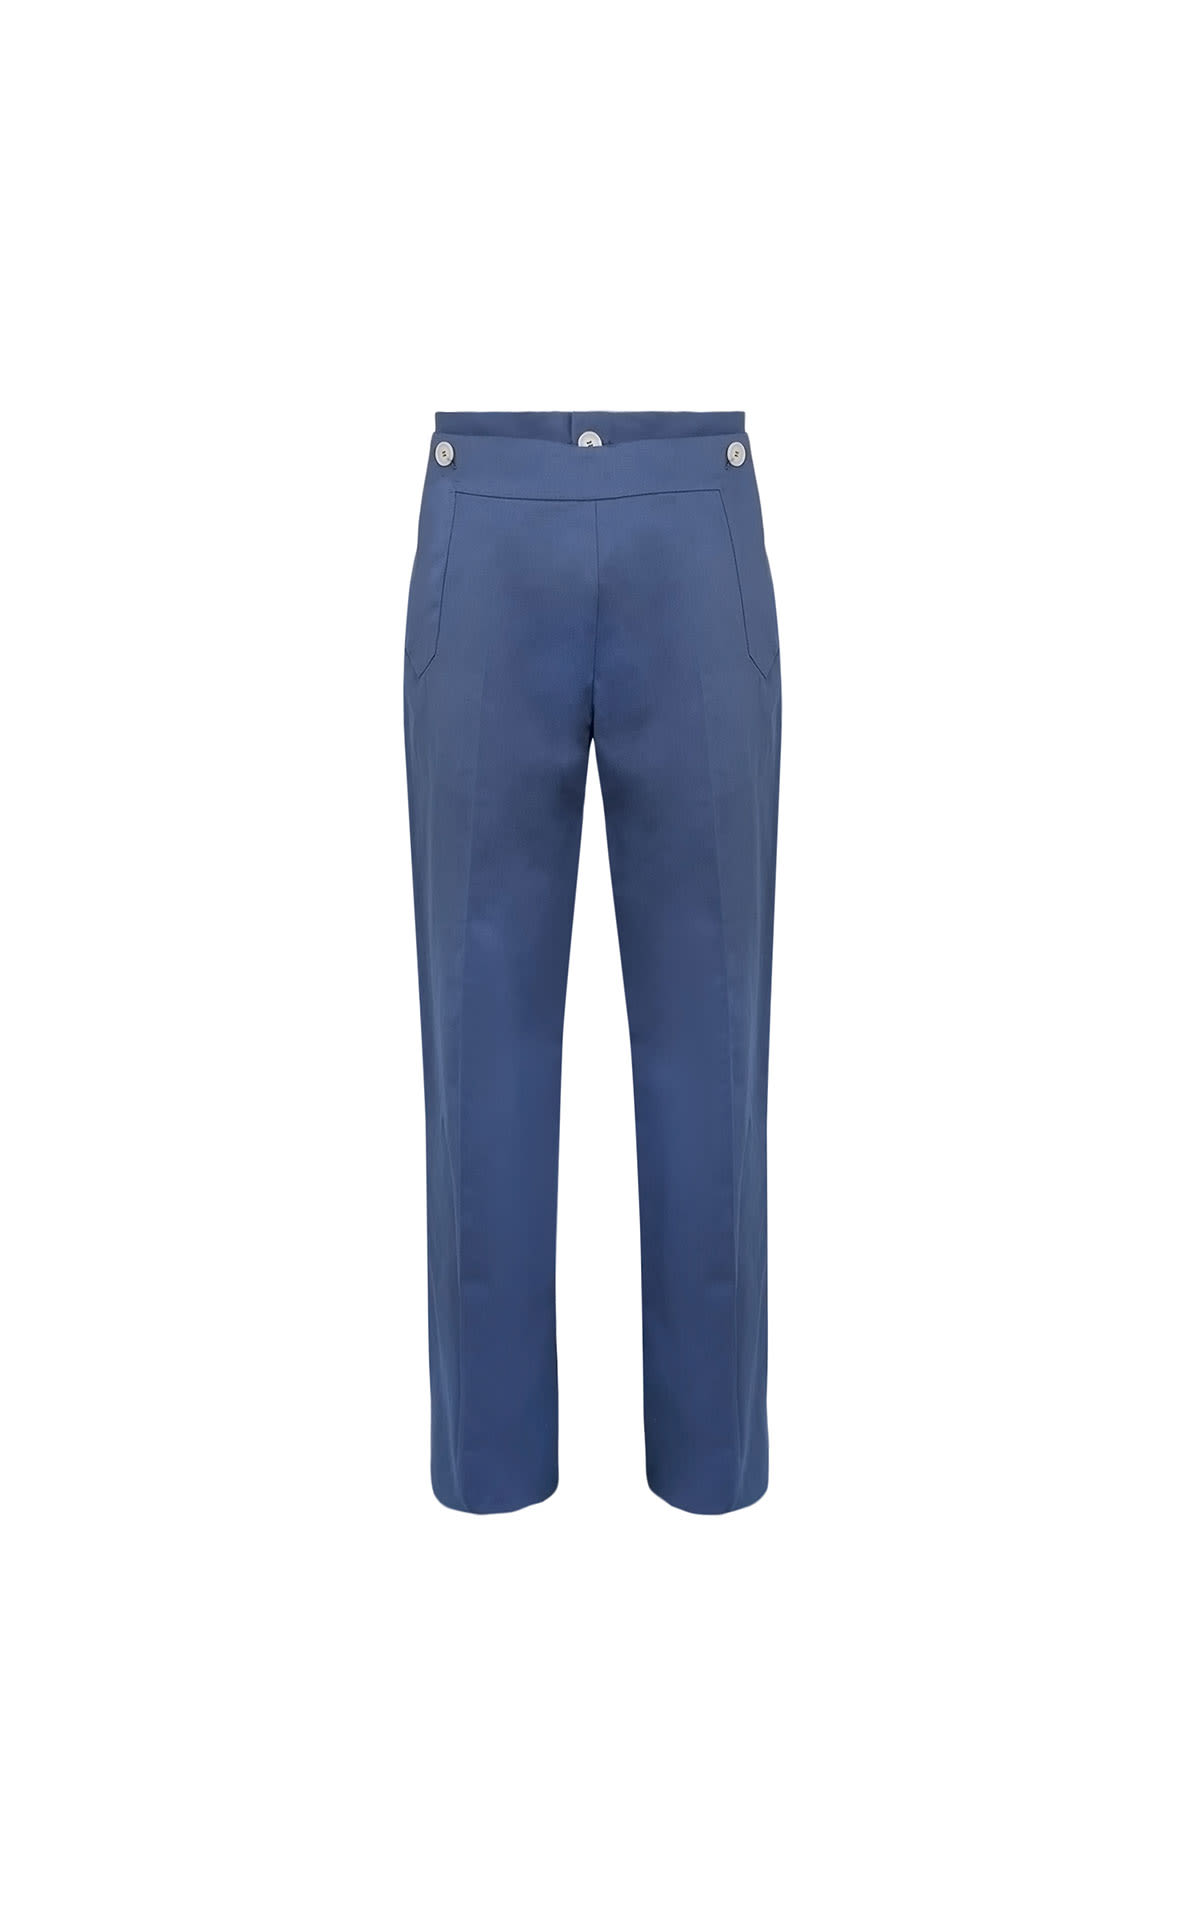 Vivienne Westwood Sailor trousers from Bicester Village